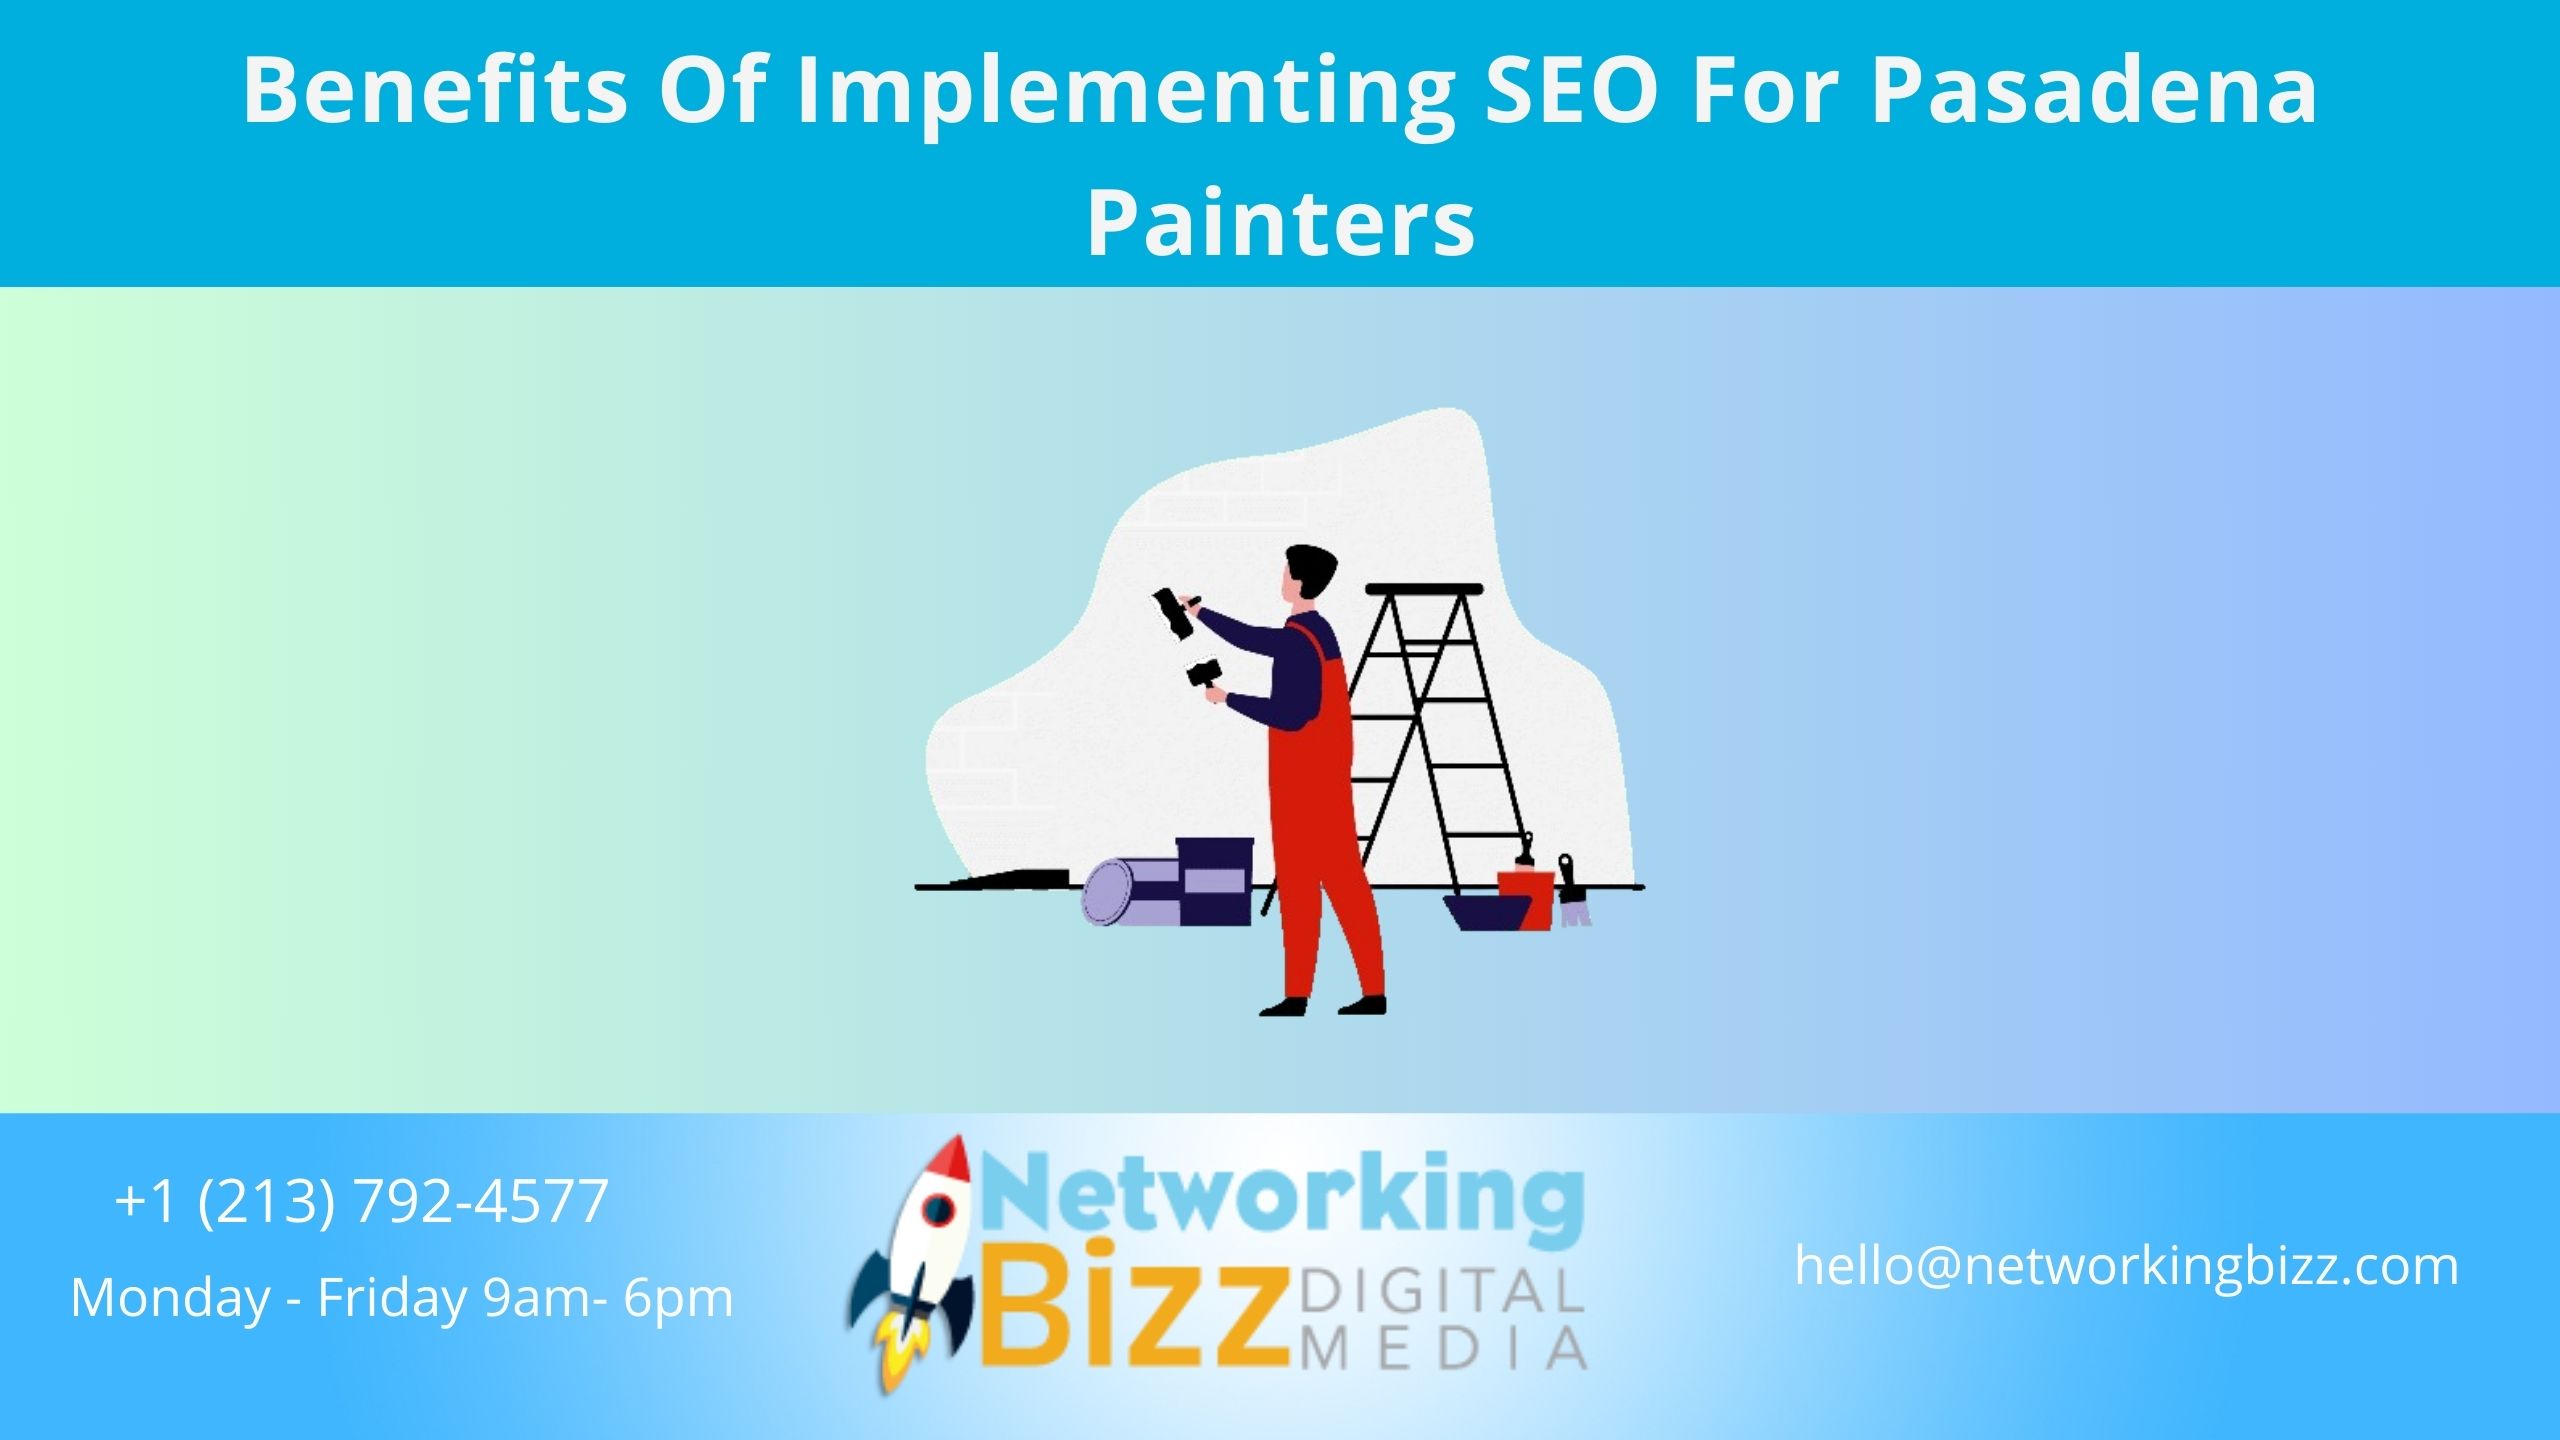 Benefits Of Implementing SEO For Pasadena Painters